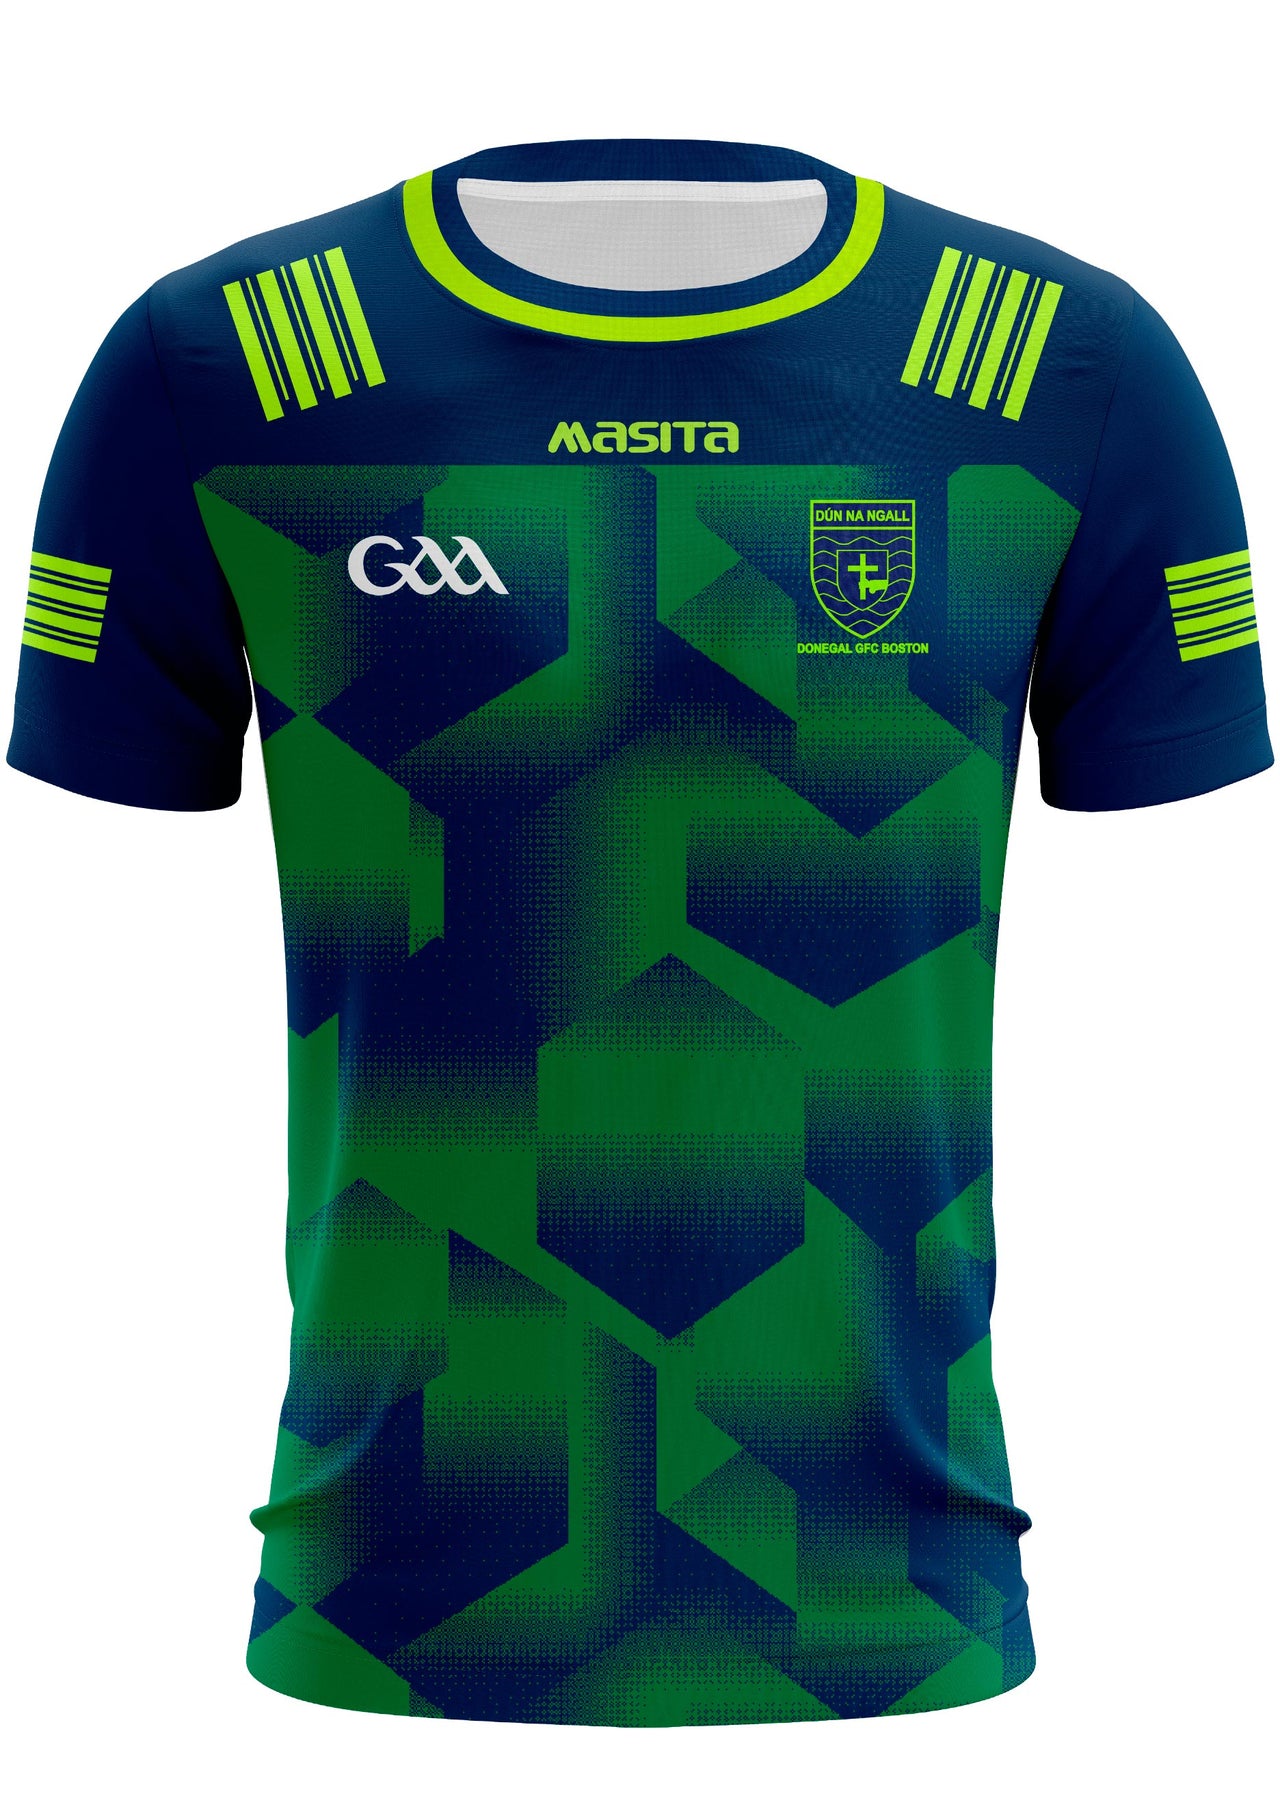 Donegal Boston Training Jersey Regular Fit Adult